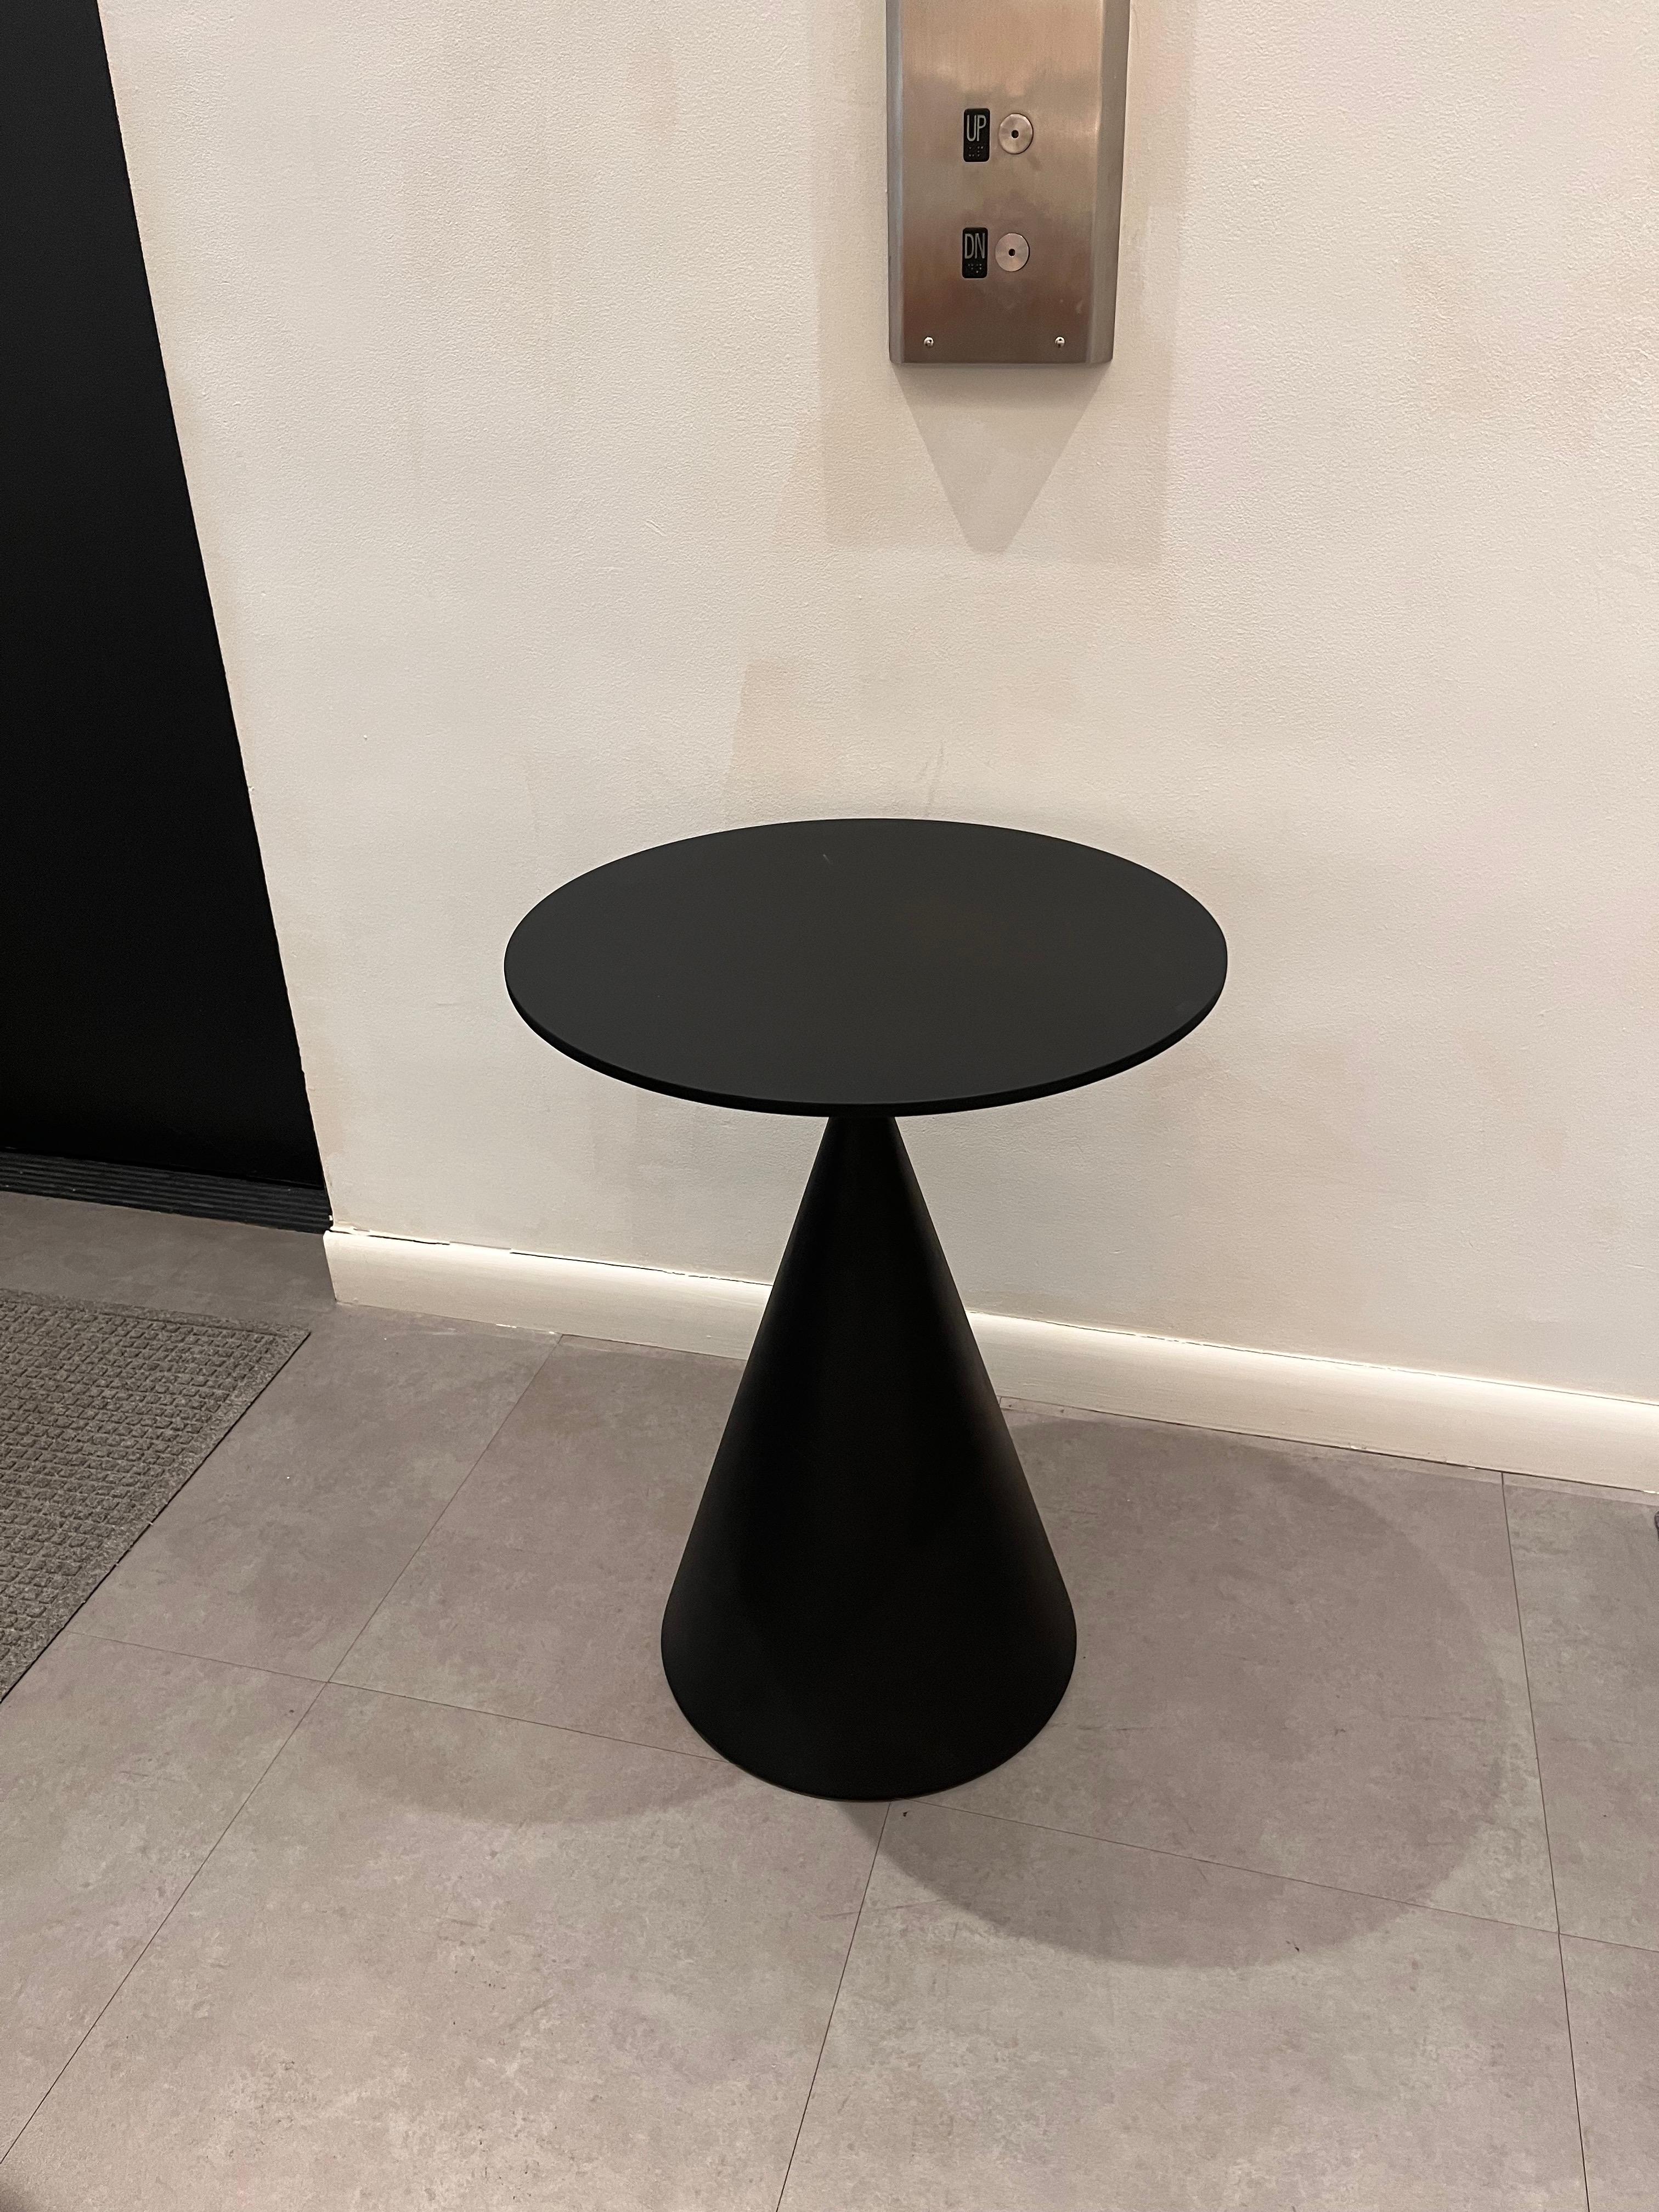 Mini clay indoor side table
black concrete d66

Ceramic top 6 mm with safety mesh underneath.
Geometric shapes and a perfect balance, always a Classic of international contemporary design. The young Desalto bestseller Clay table reduces its